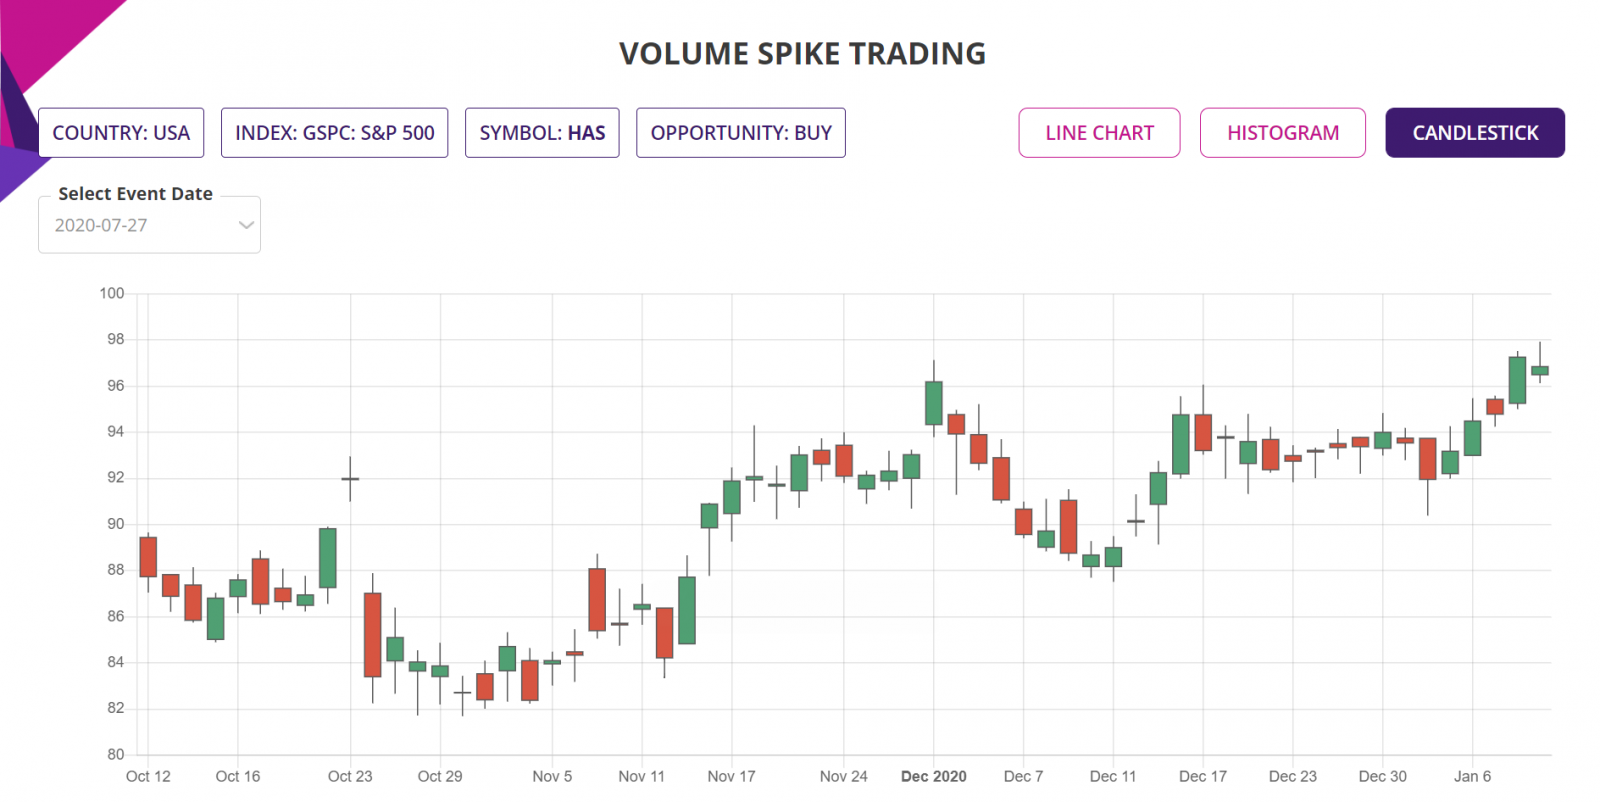 Volume spike trading strategy, detailed report, Candlestick chart, S&P500 Stocks